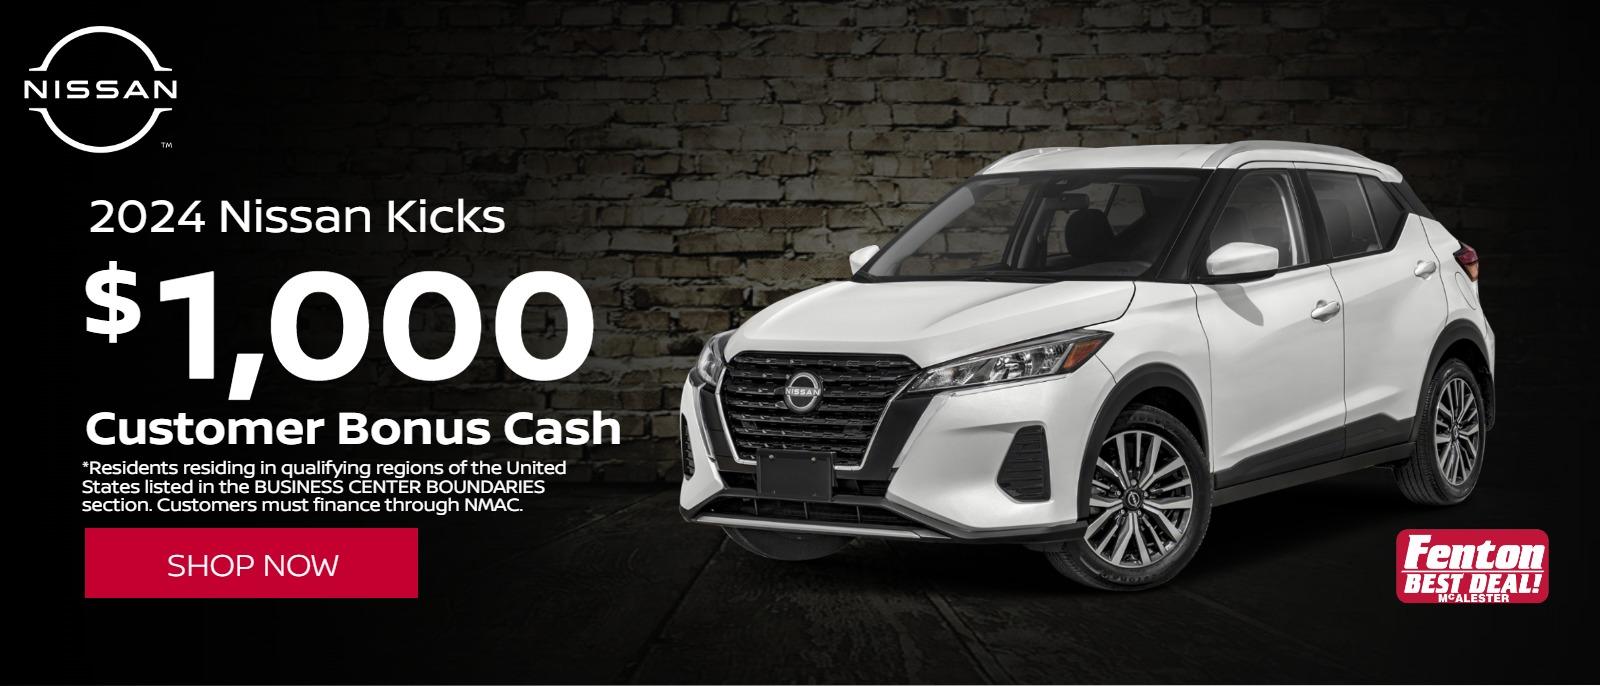 2024 Nissan Kicks
$1000 Customer Bonus Cash
*Residents residing in qualifying regions of the United States listed in the BUSINESS CENTER BOUNDARIES section. Customers must finance through NMAC.